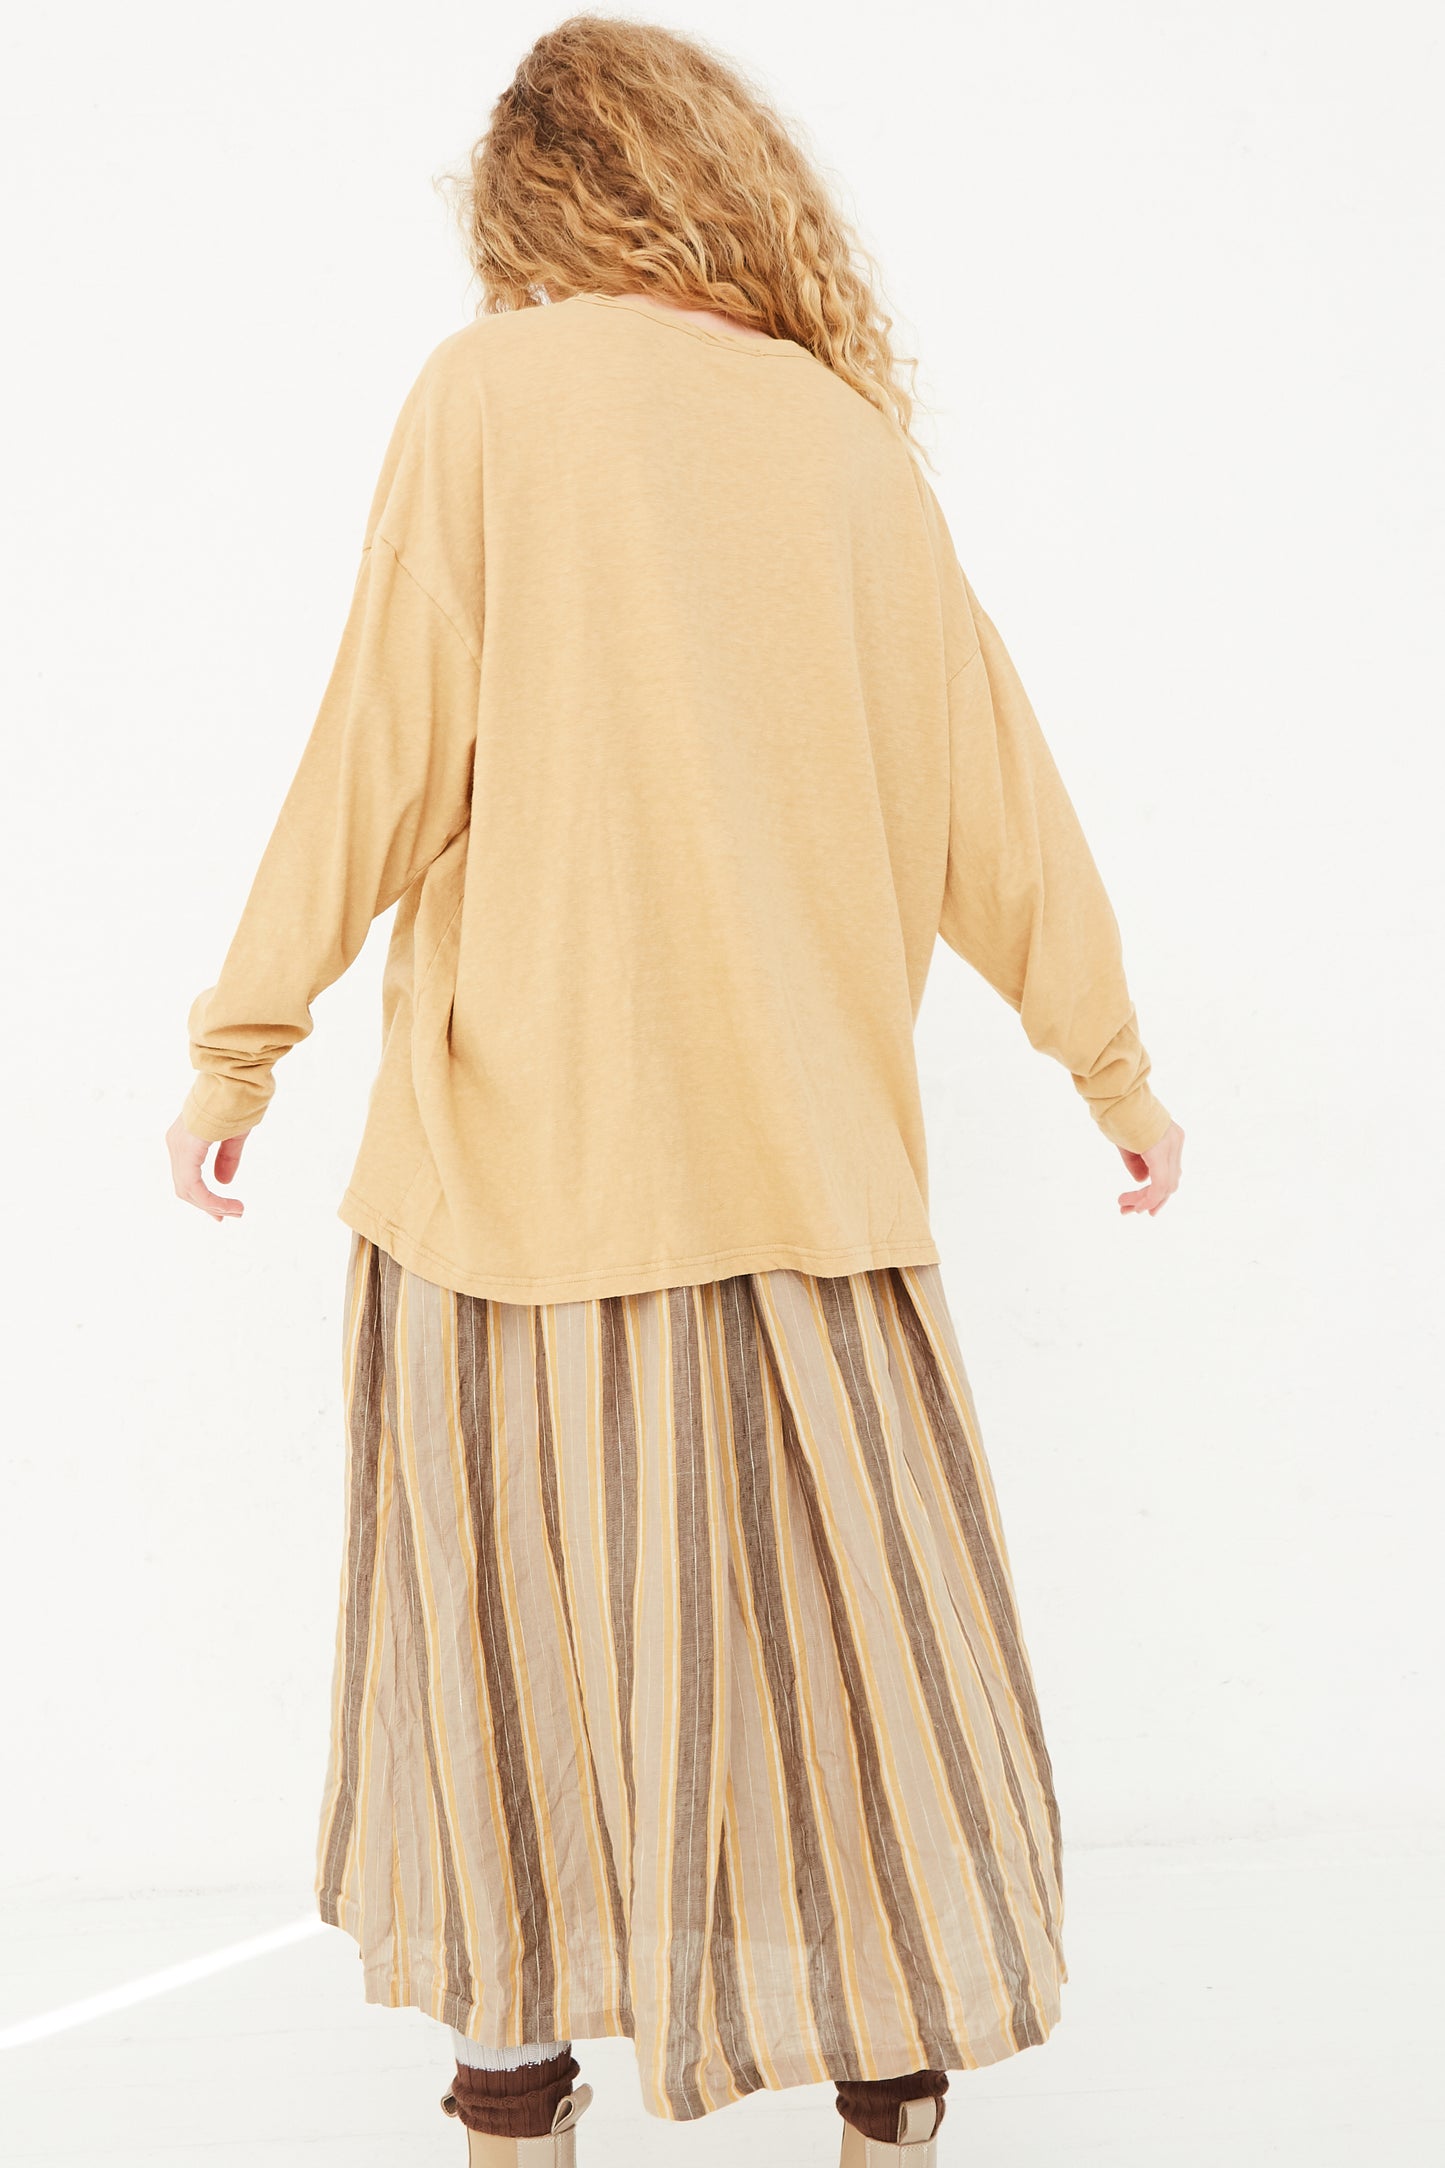 The back of a model wearing an Ichi Antiquités Cotton Loose Pullover in Camel, long sleeve top.